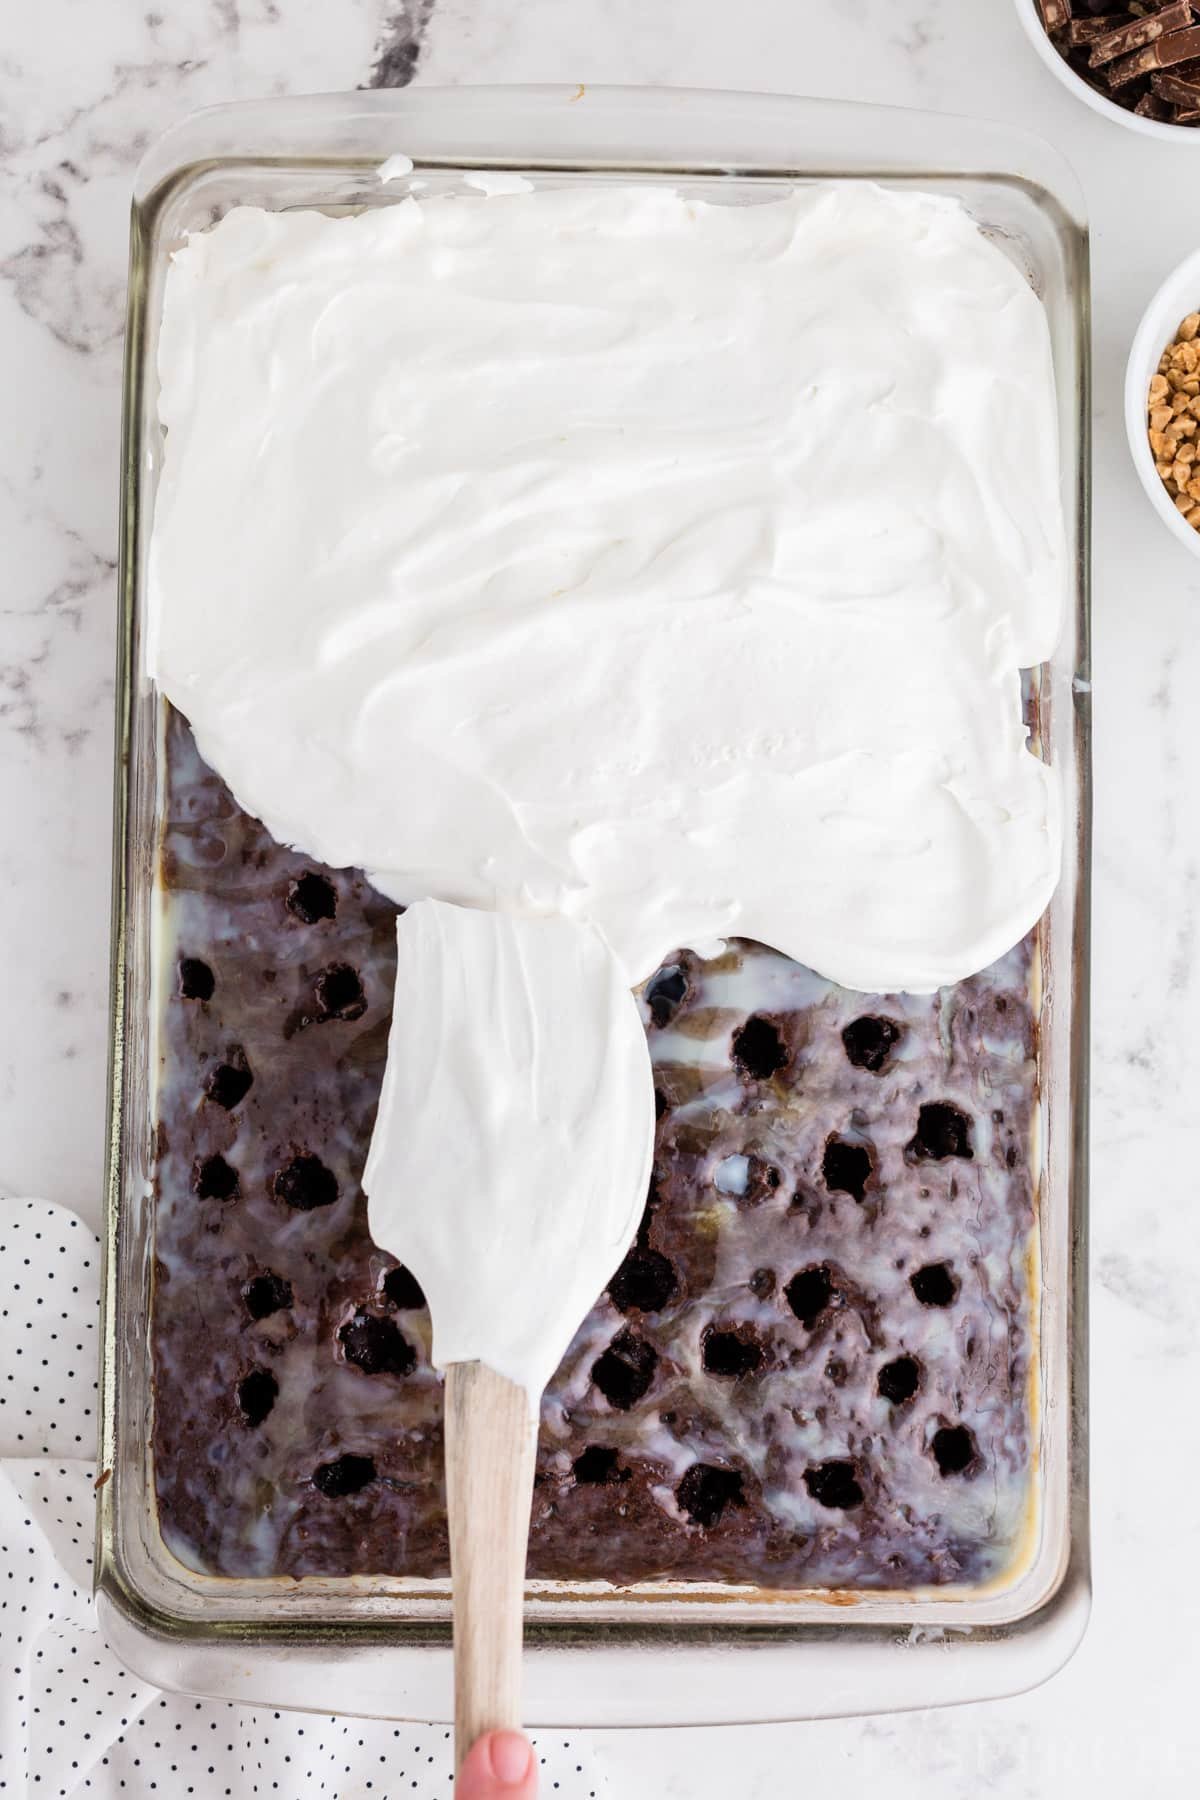 Whipped topping with plastic spatula spread evenly over the poked cake in a glass baking dish on the countertop.